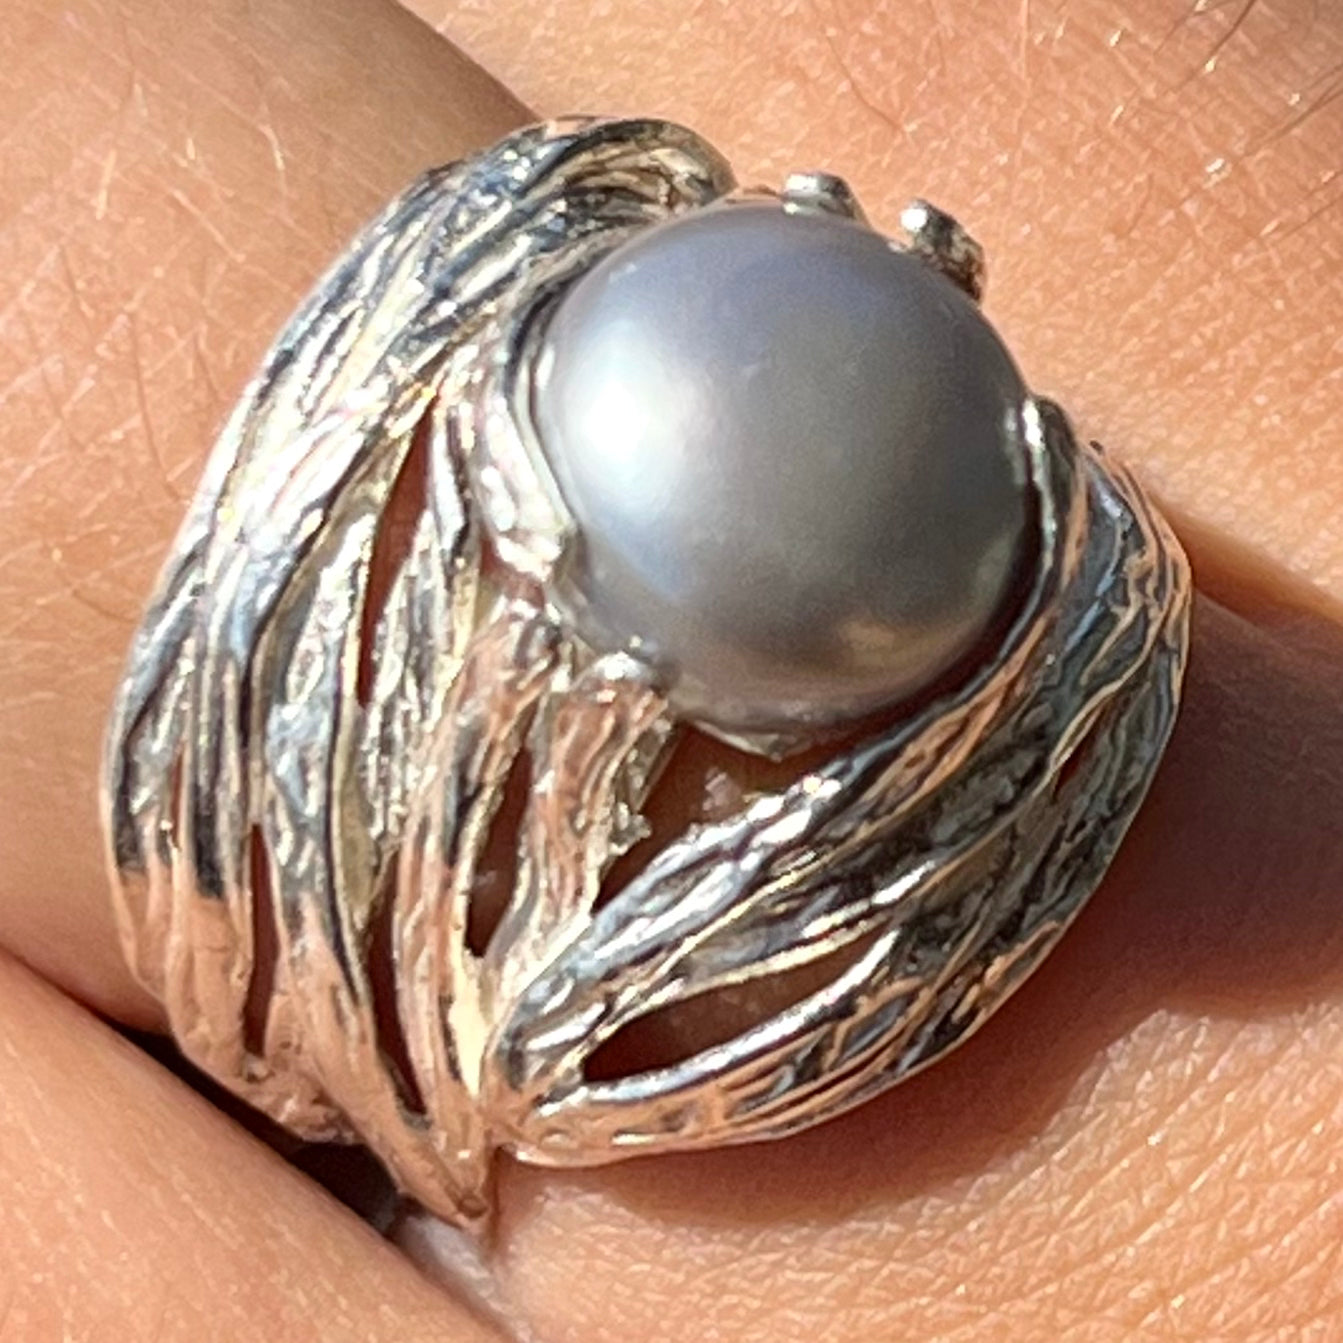 Organic Style Pearl Ring | Sterling Silver